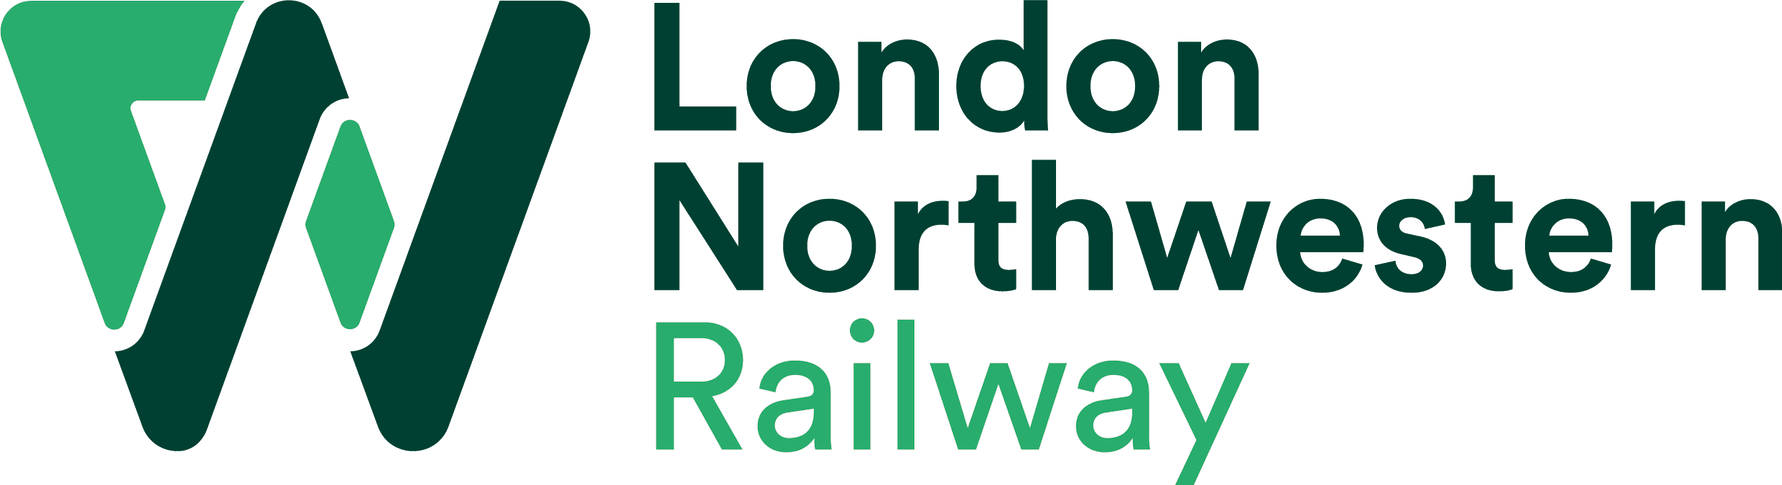 London Northwestern Railway issues travel advice as leisure industry restrictions ease